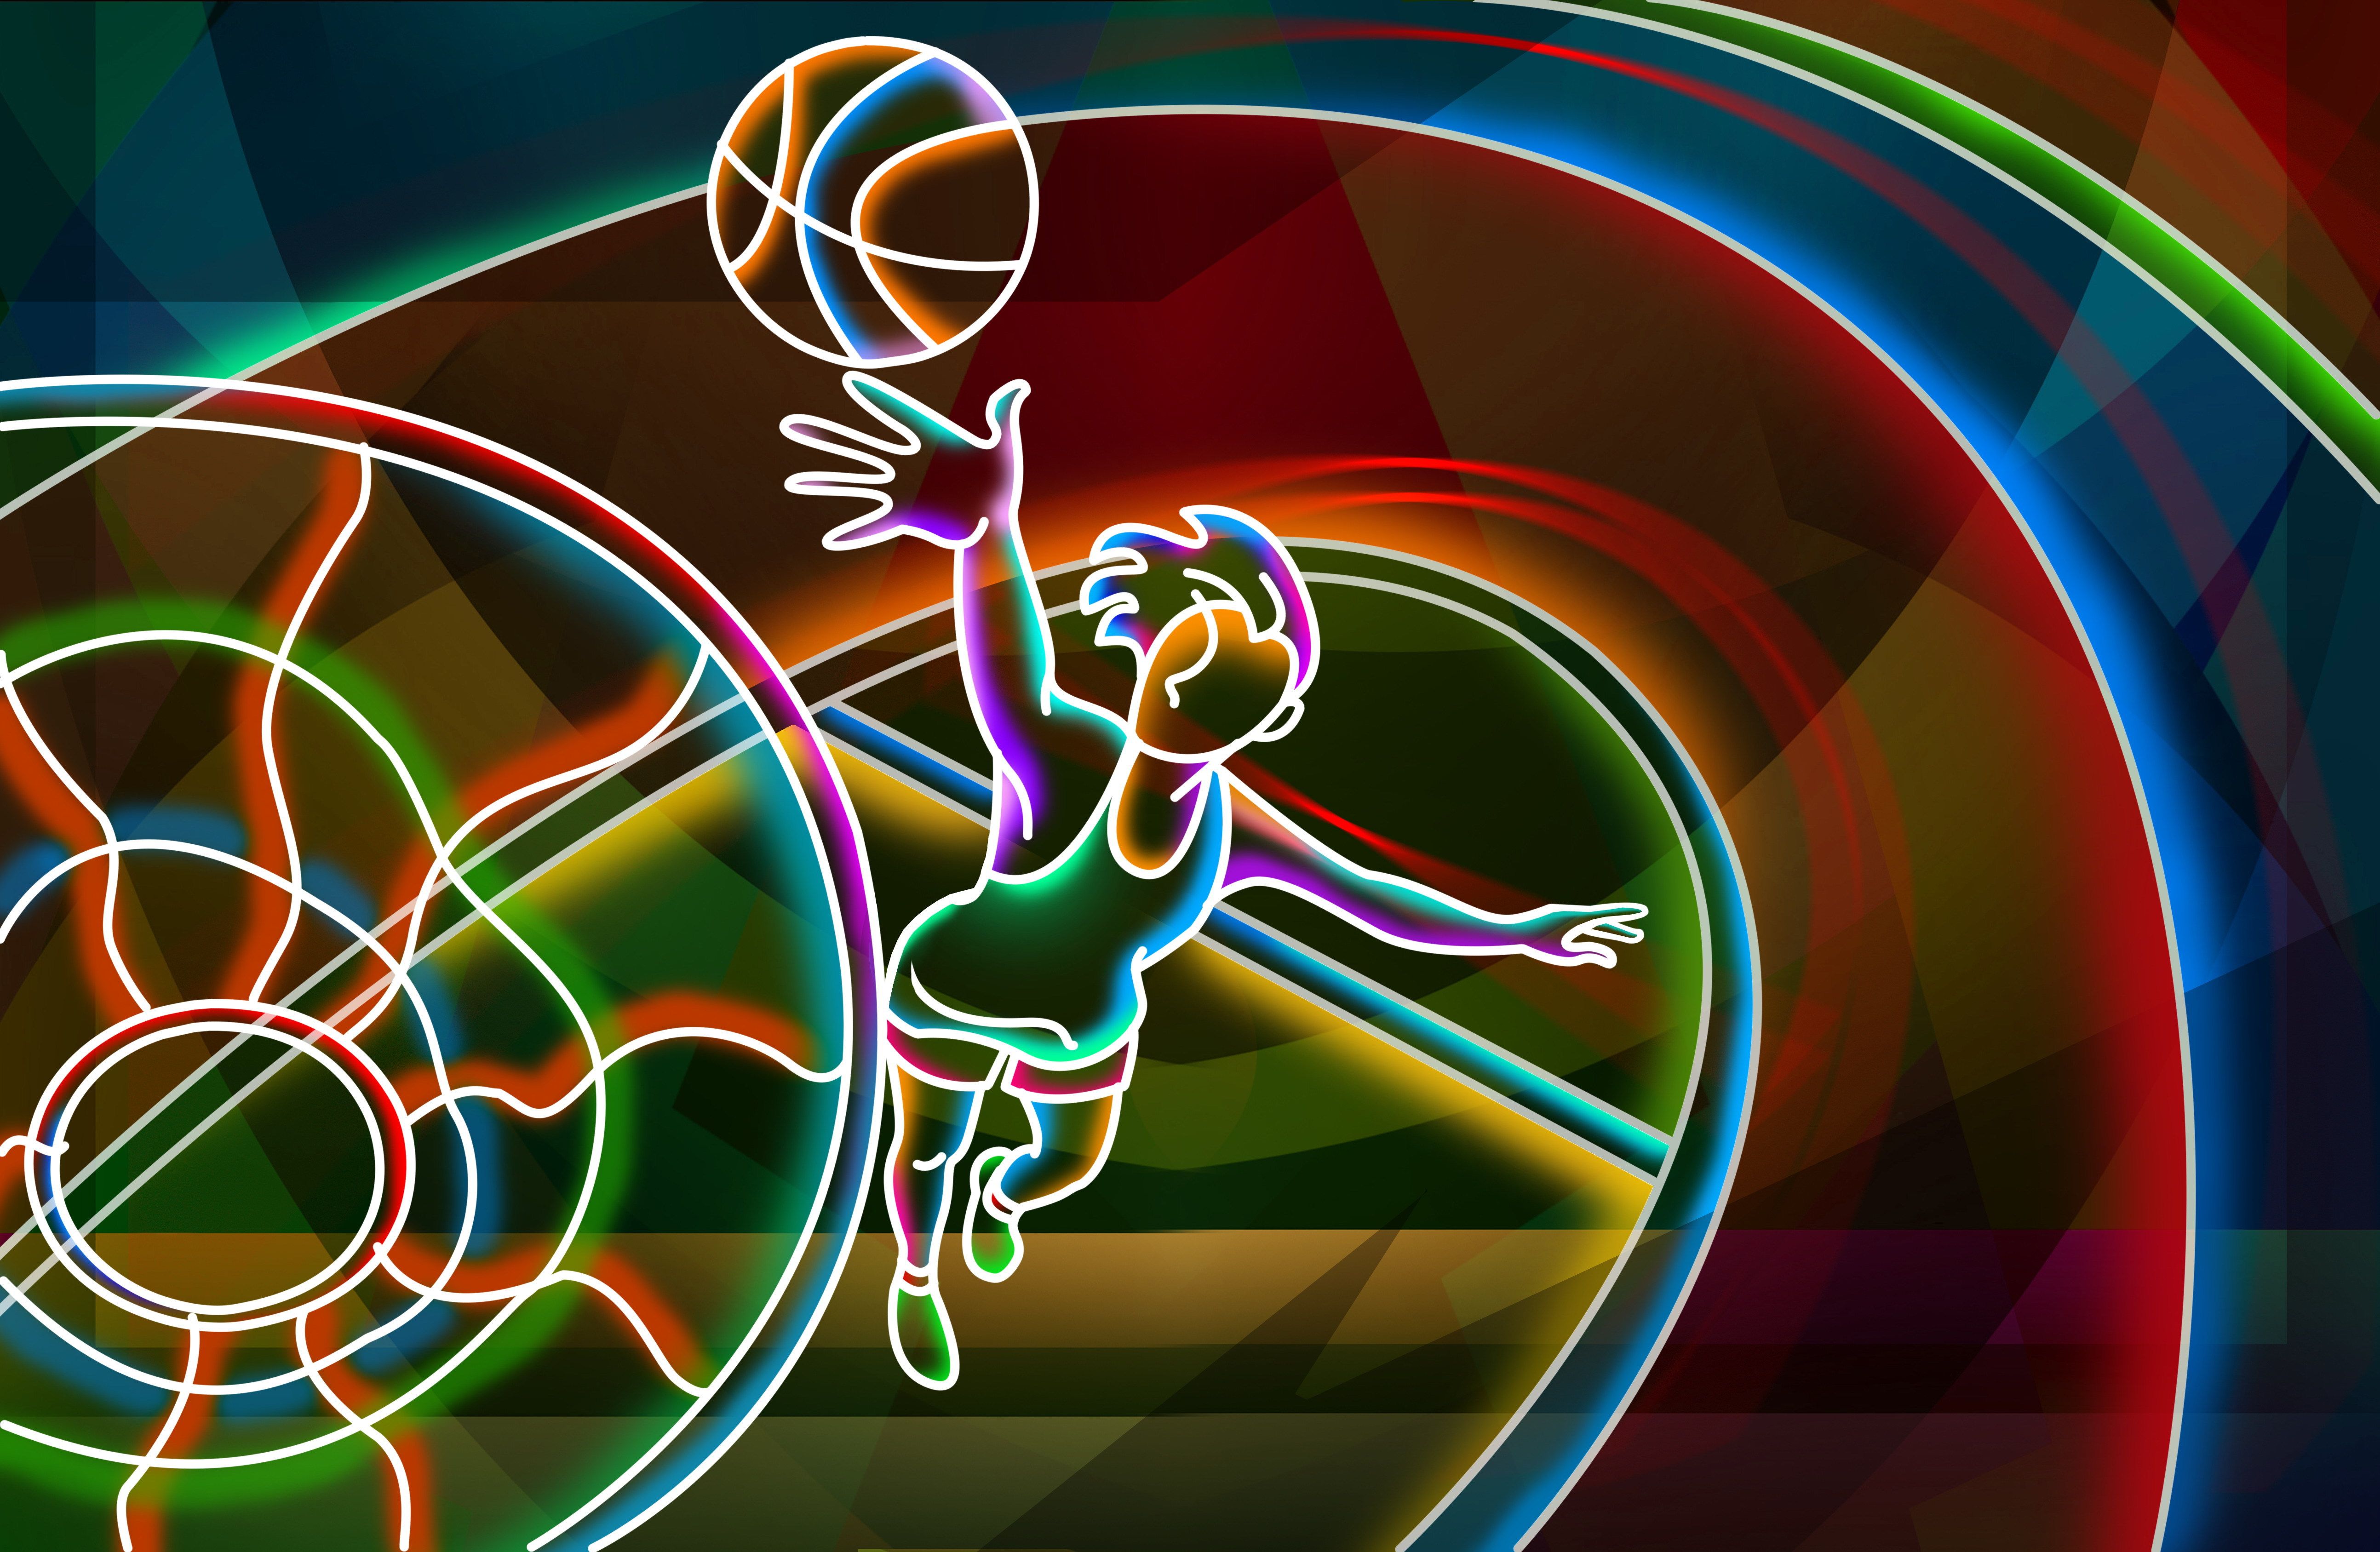 Basketball player wallpapers and images - wallpapers, pictures, photos